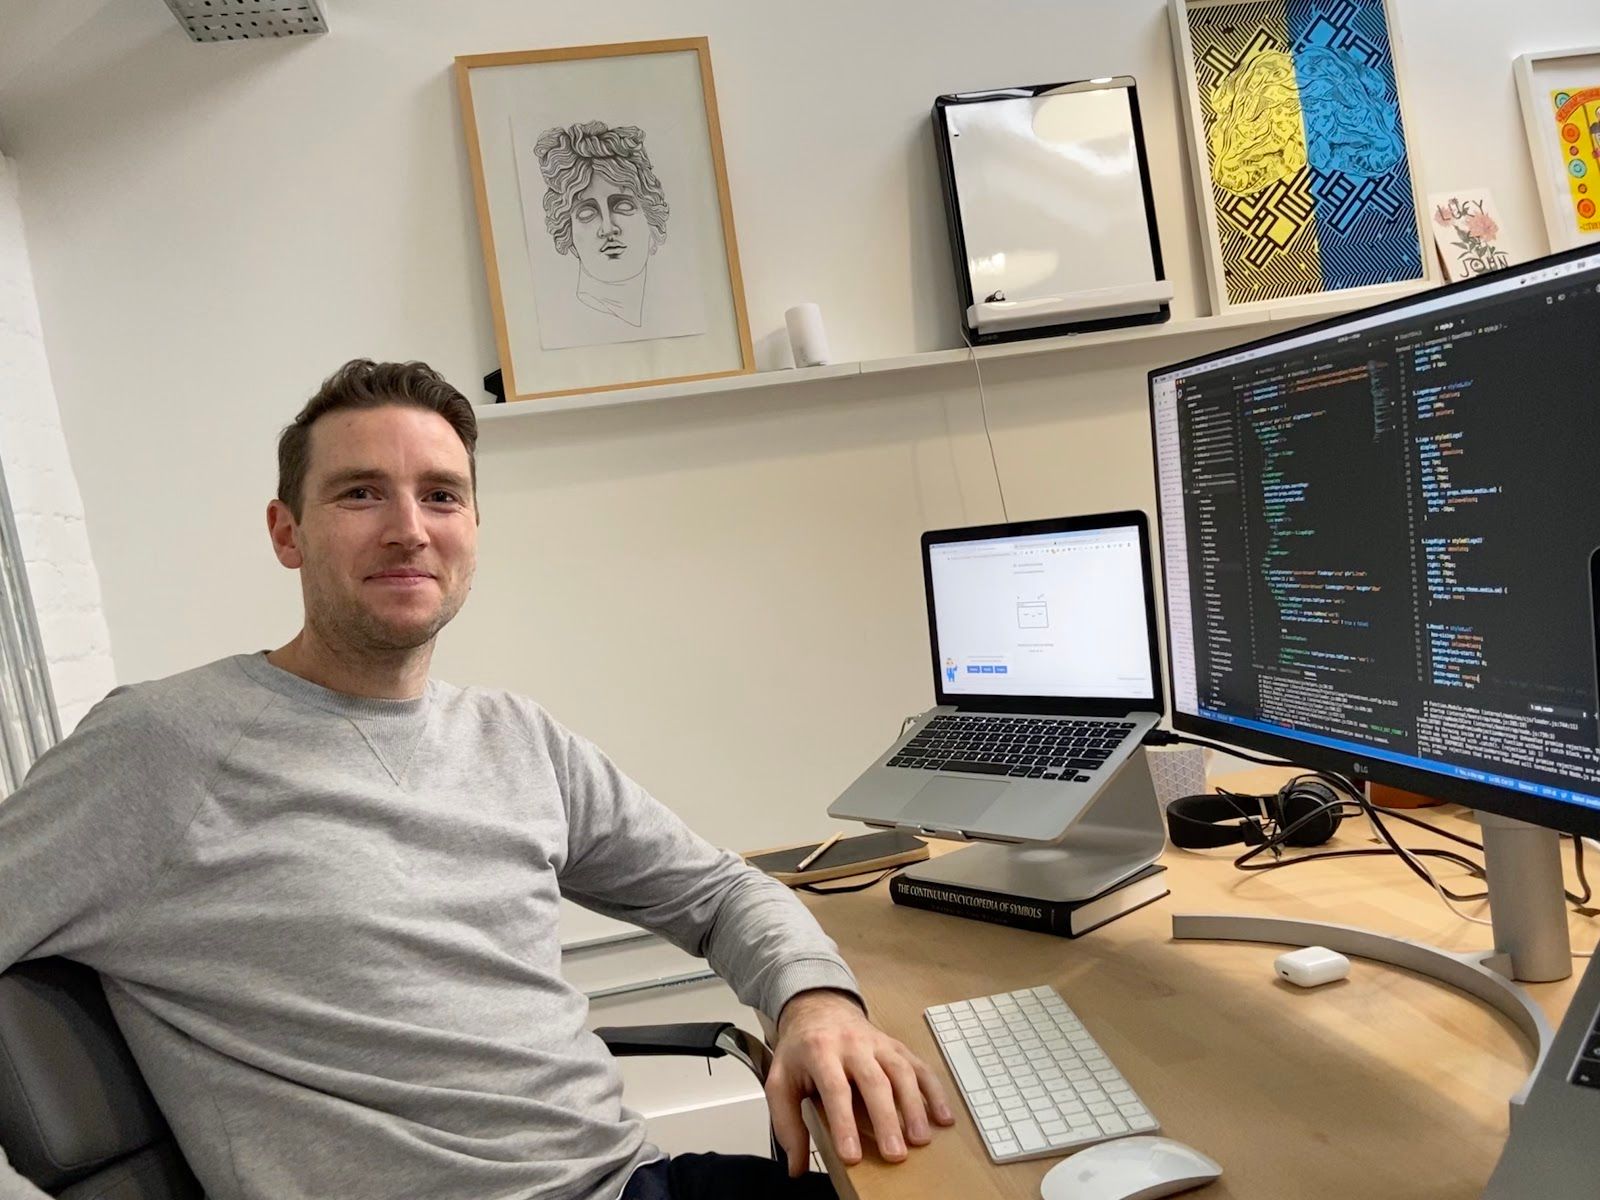 From construction to coding - this dev tells us how he changed career